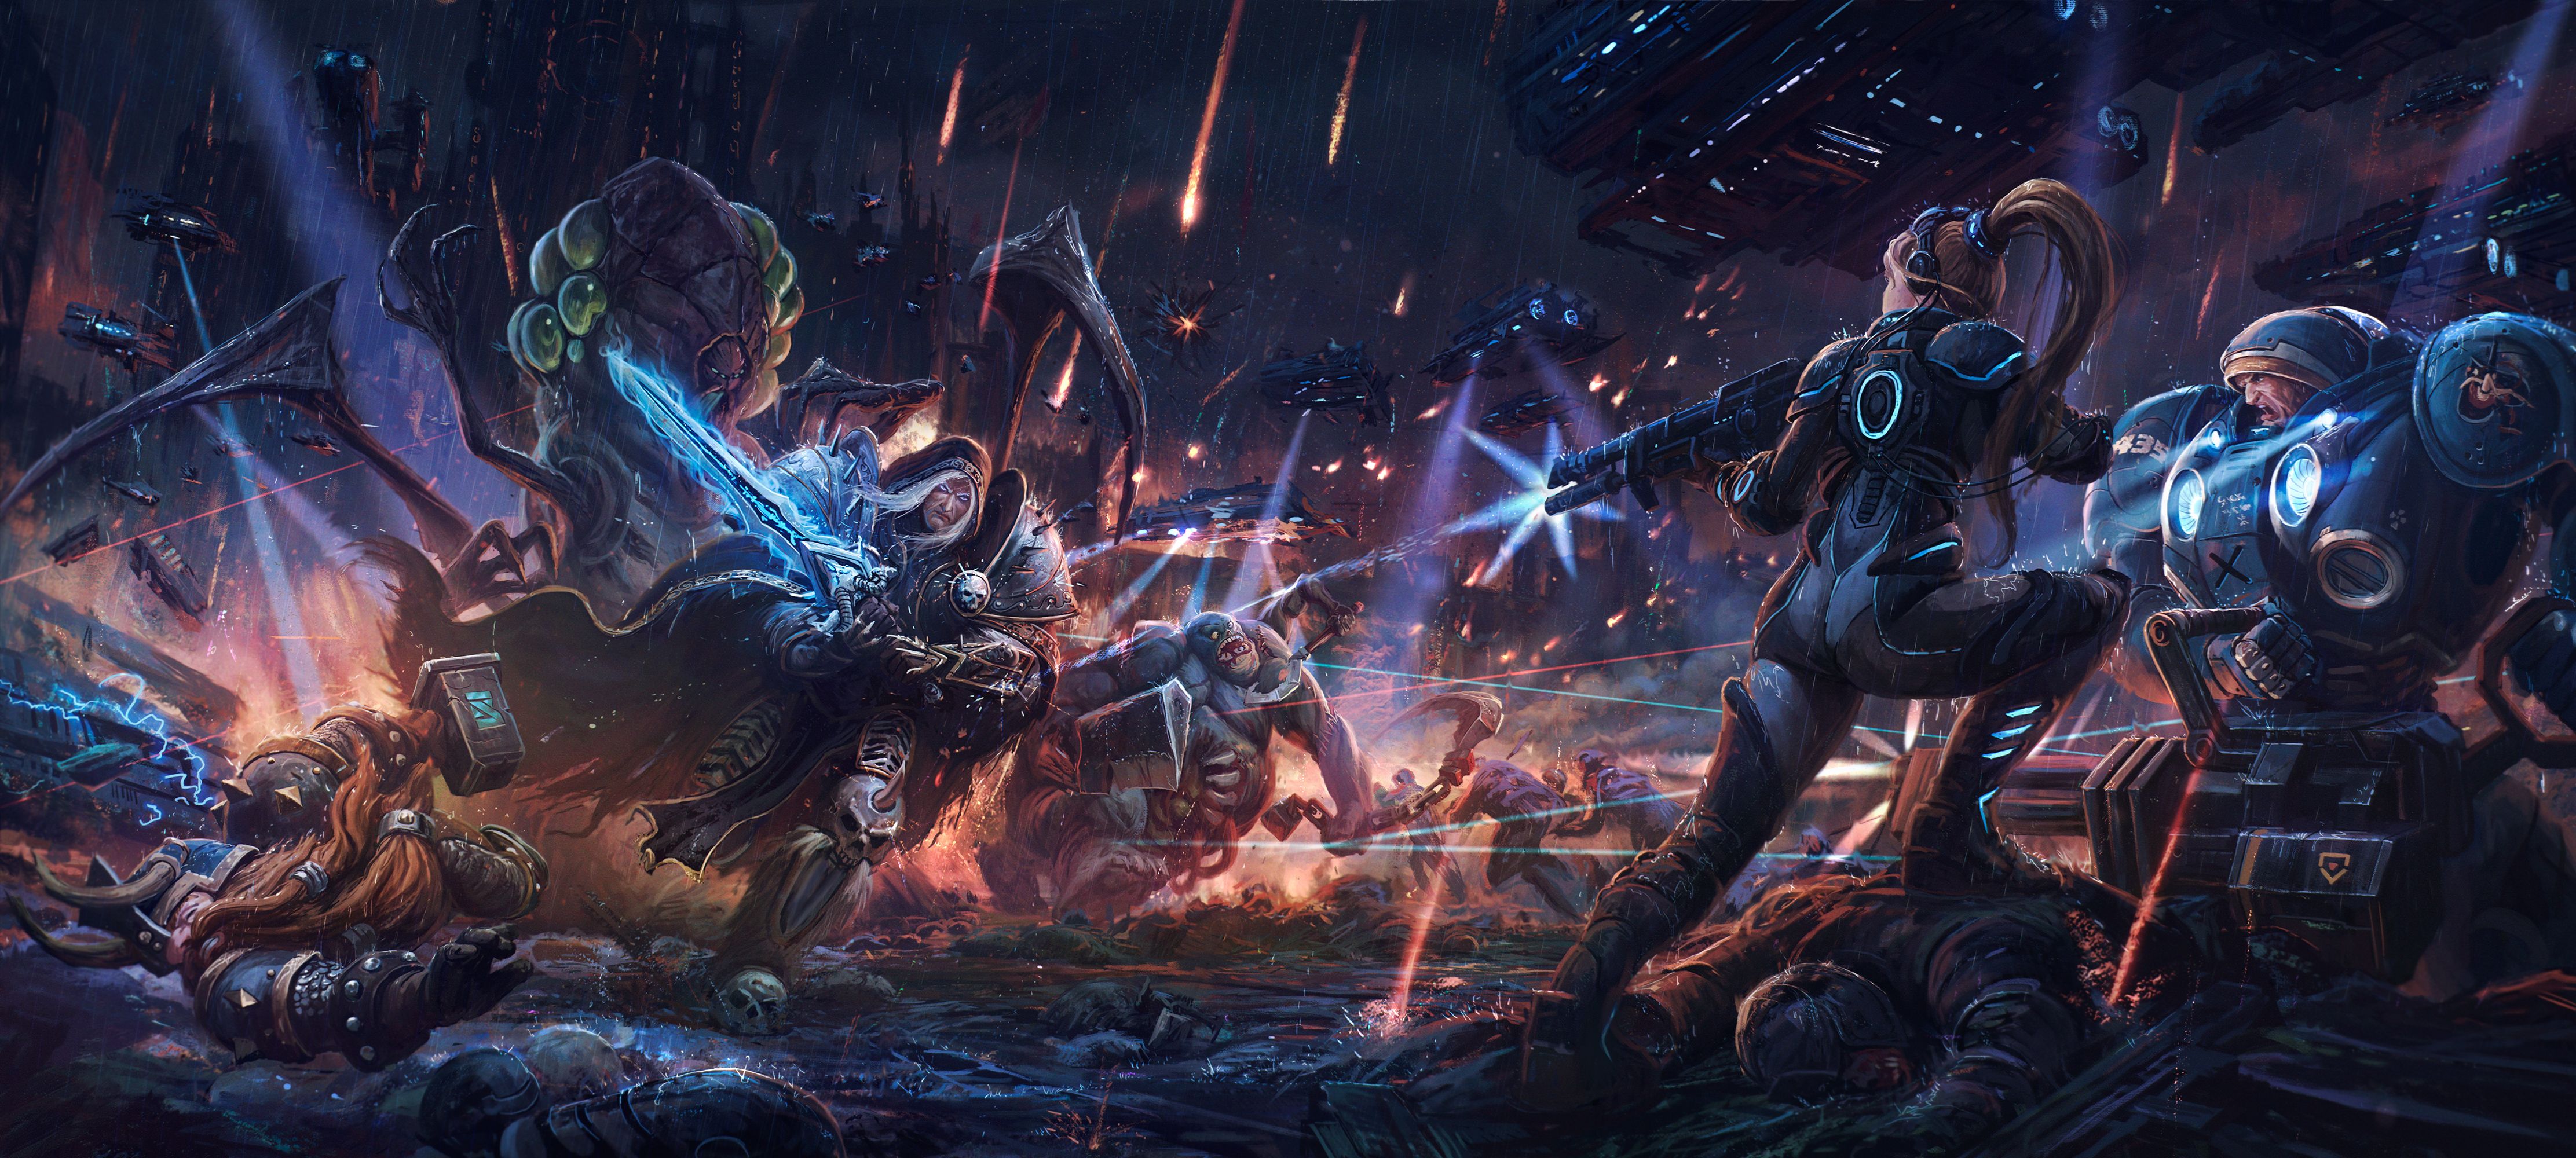 4448x2000 Heroes Of The Storm Hd Wallpaper